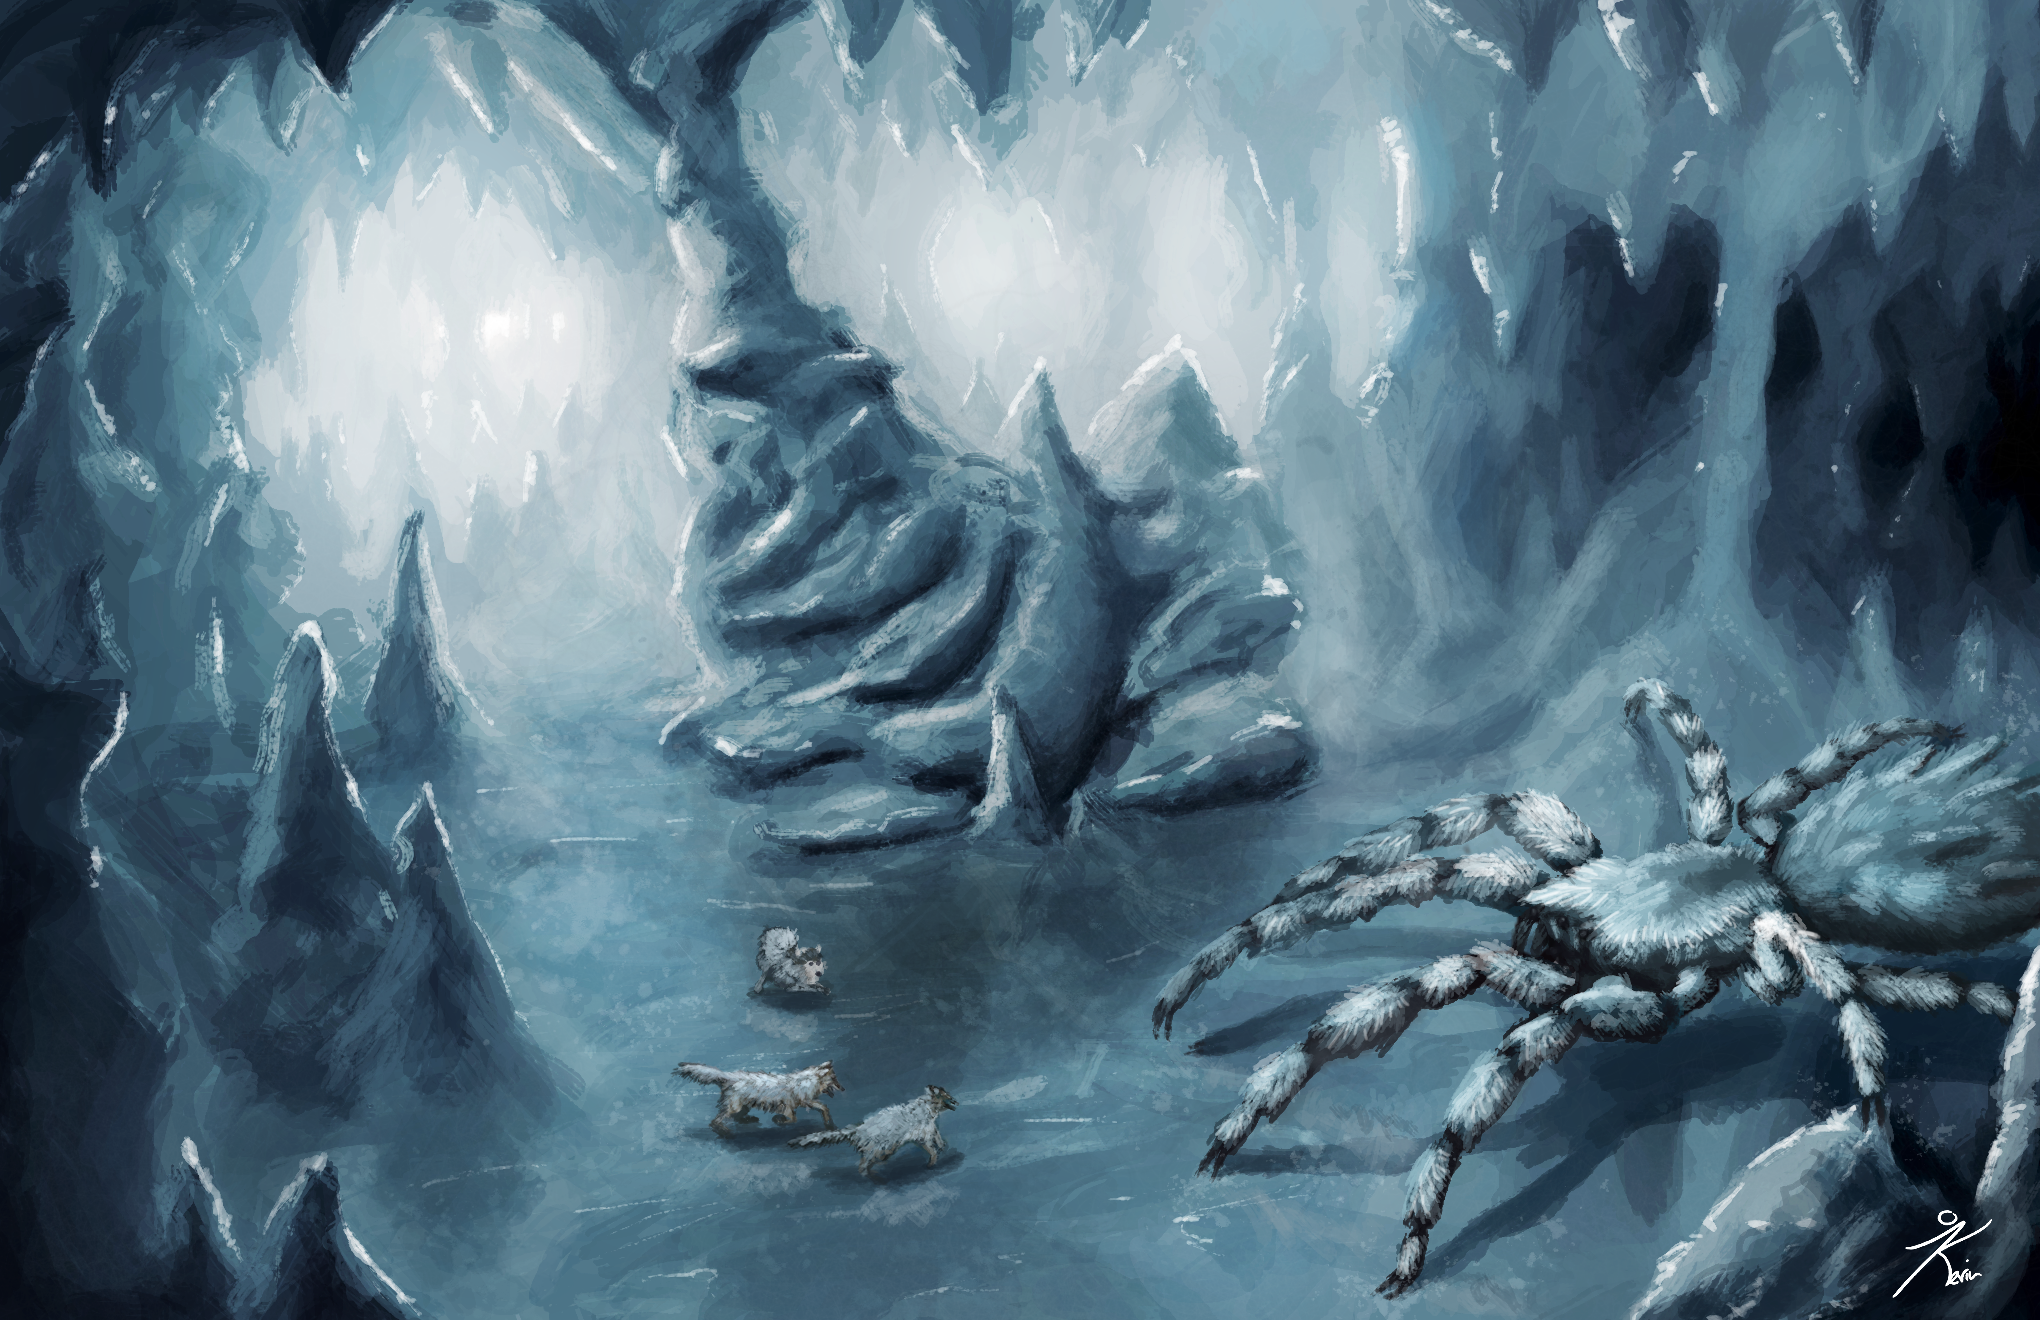 General 2040x1320 creature ice spider giant wolf cave blue drawing fantasy art Kev-Art digital art watermarked